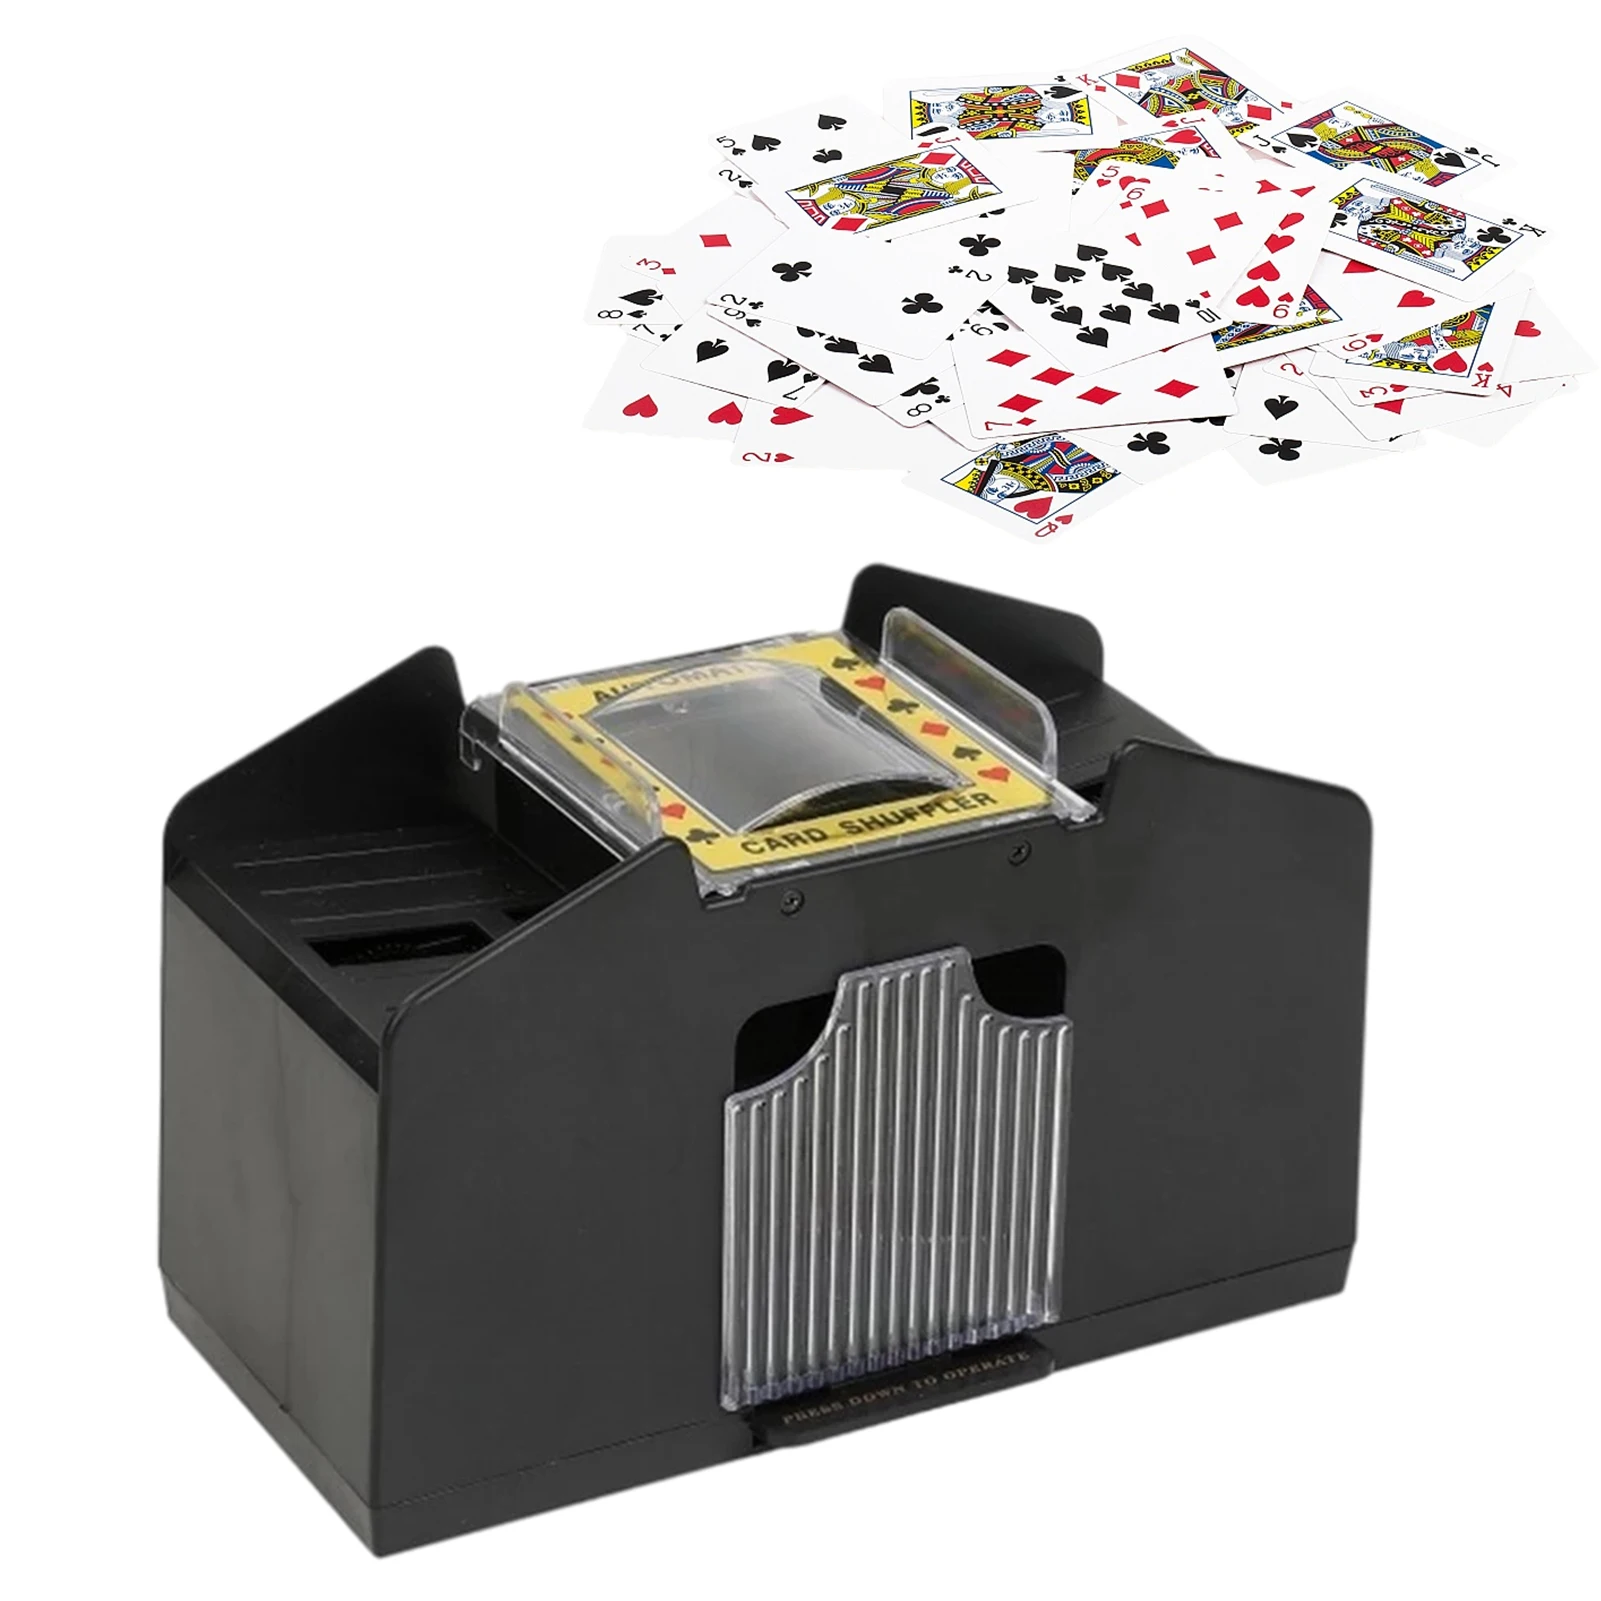 BESPORTBLE Automatic Card Shuffler Machine for Poker Games for Home Party Club Black